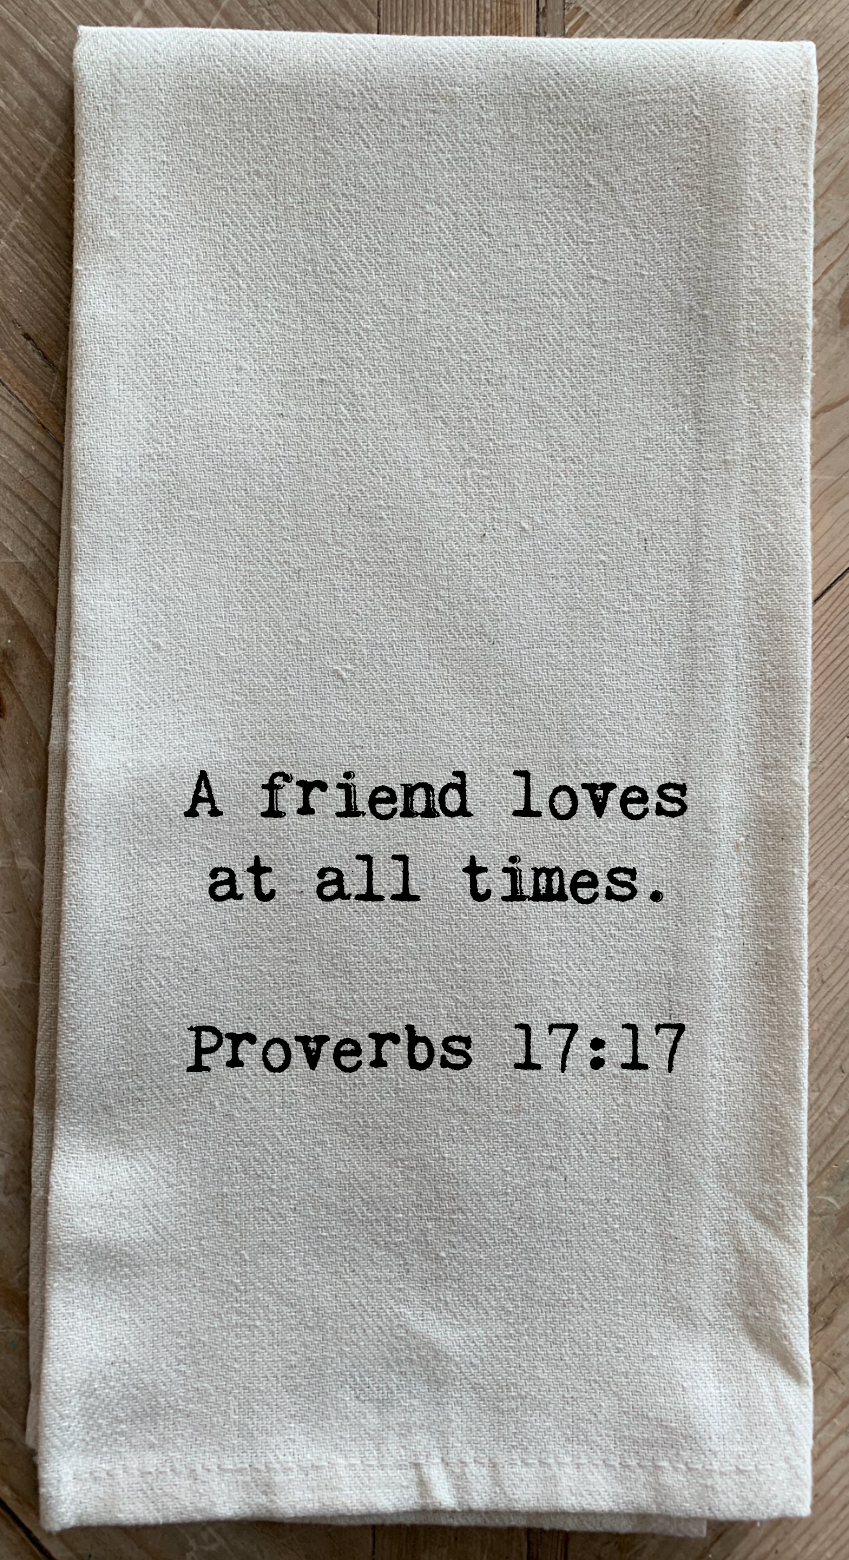 A friend loves at all times. ~ Proverbs 17:17